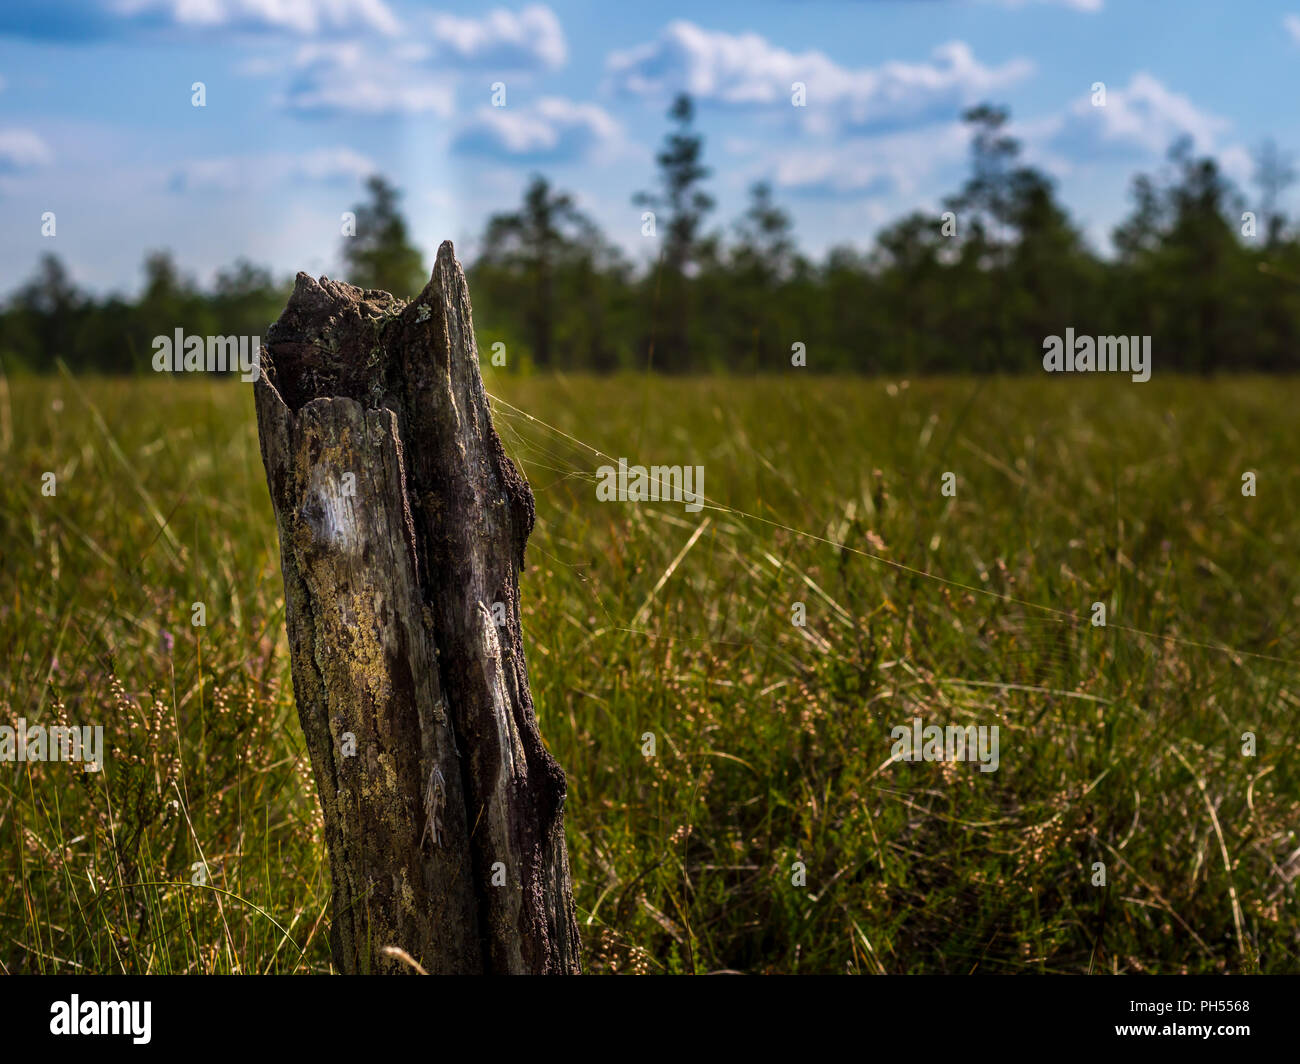 Tree remains in swamp Stock Photo